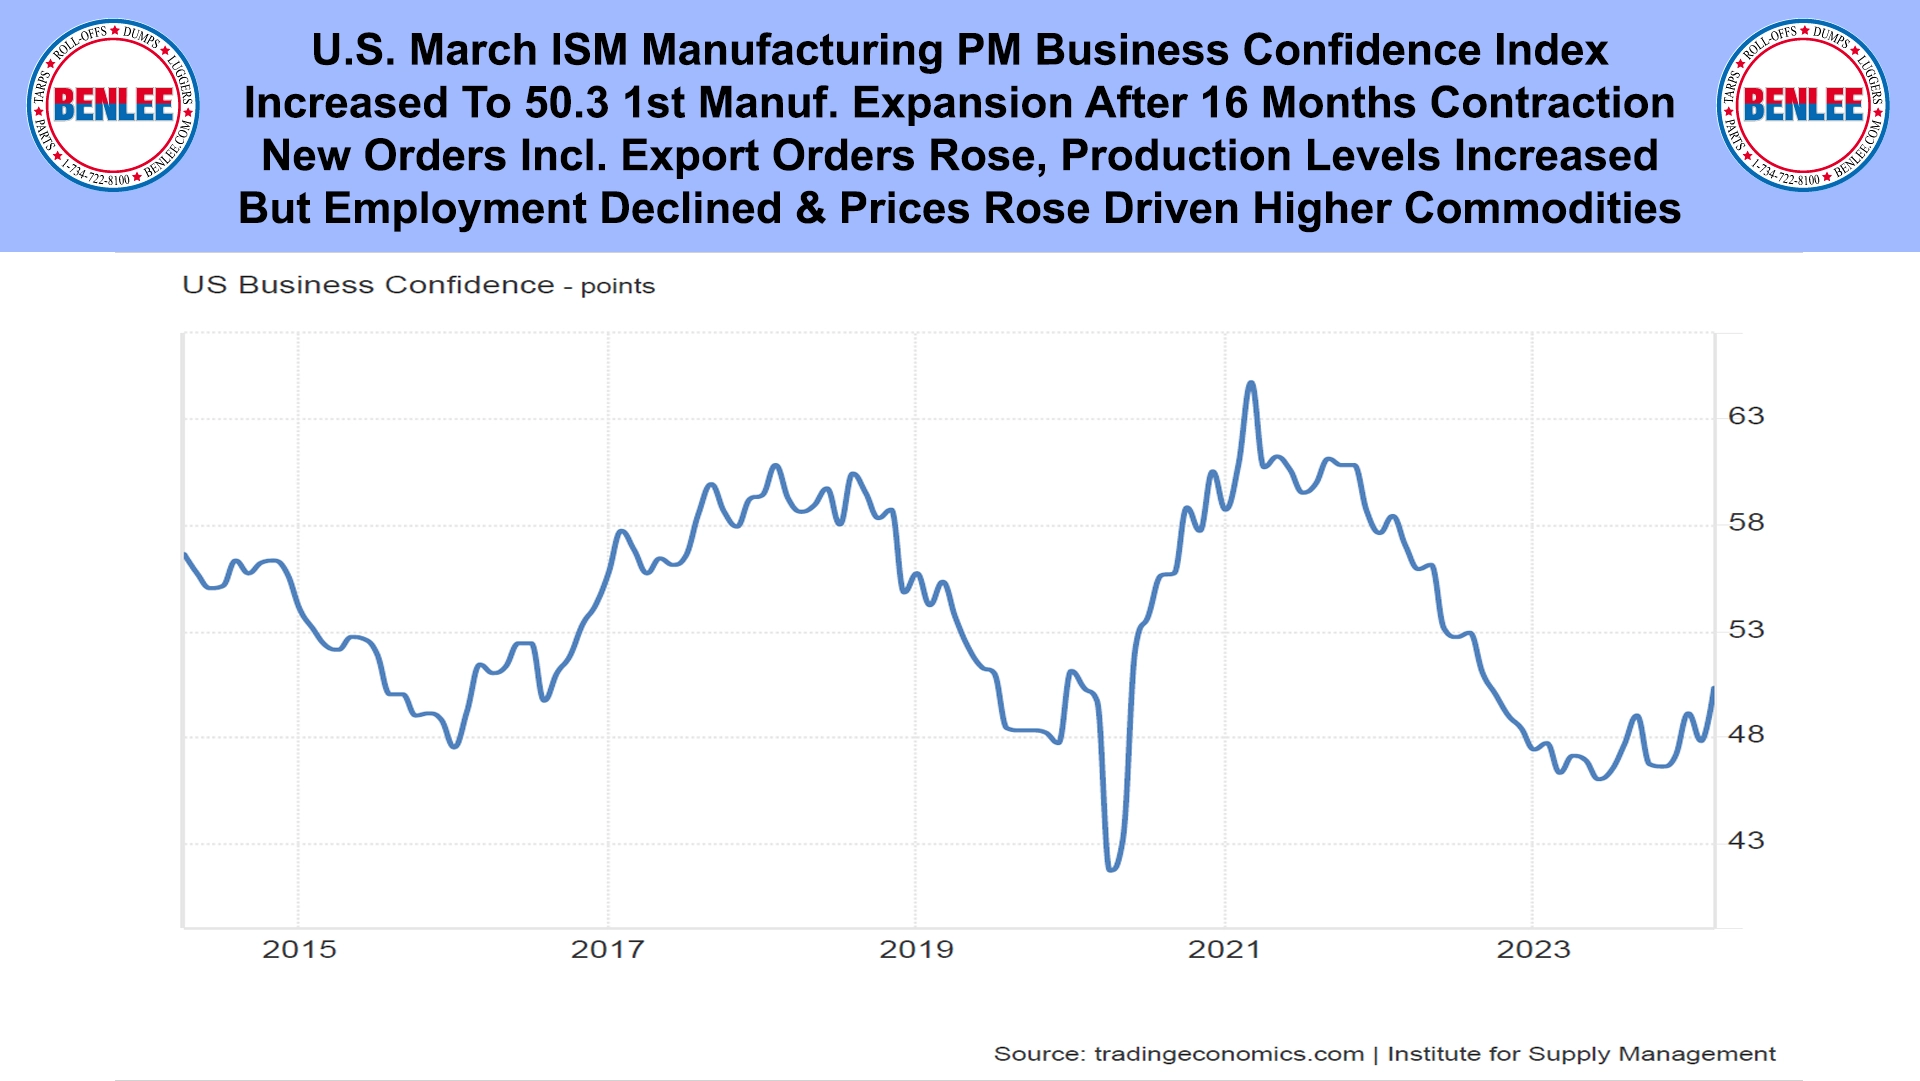 U.S. March ISM Manufacturing PM Business Confidence Index